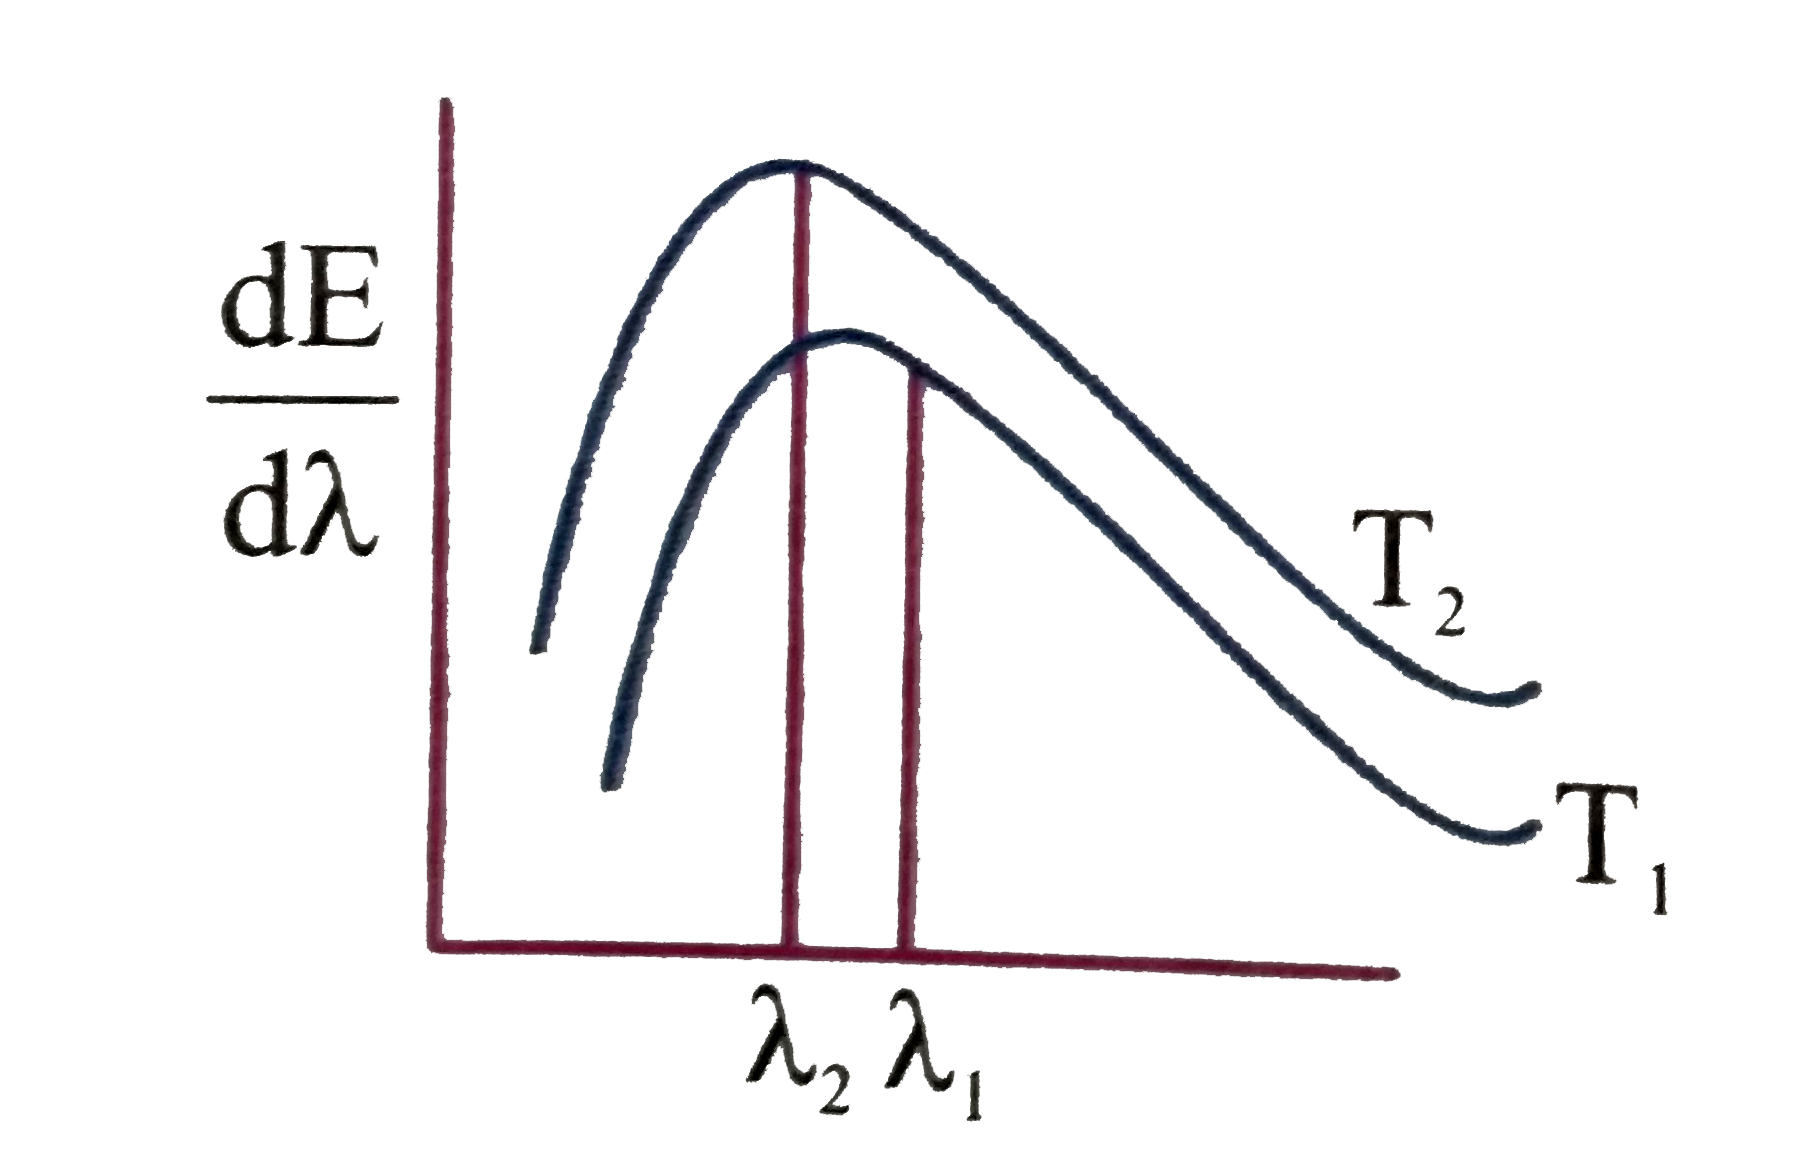 The spectral emissive power E(lambda) for a body at temperature T(1) is plotted against the wavelength and area under the curve is found to be 9A.At a different temperature T(2) the area is found to be A then lambda(1)//lambda(2)=    .